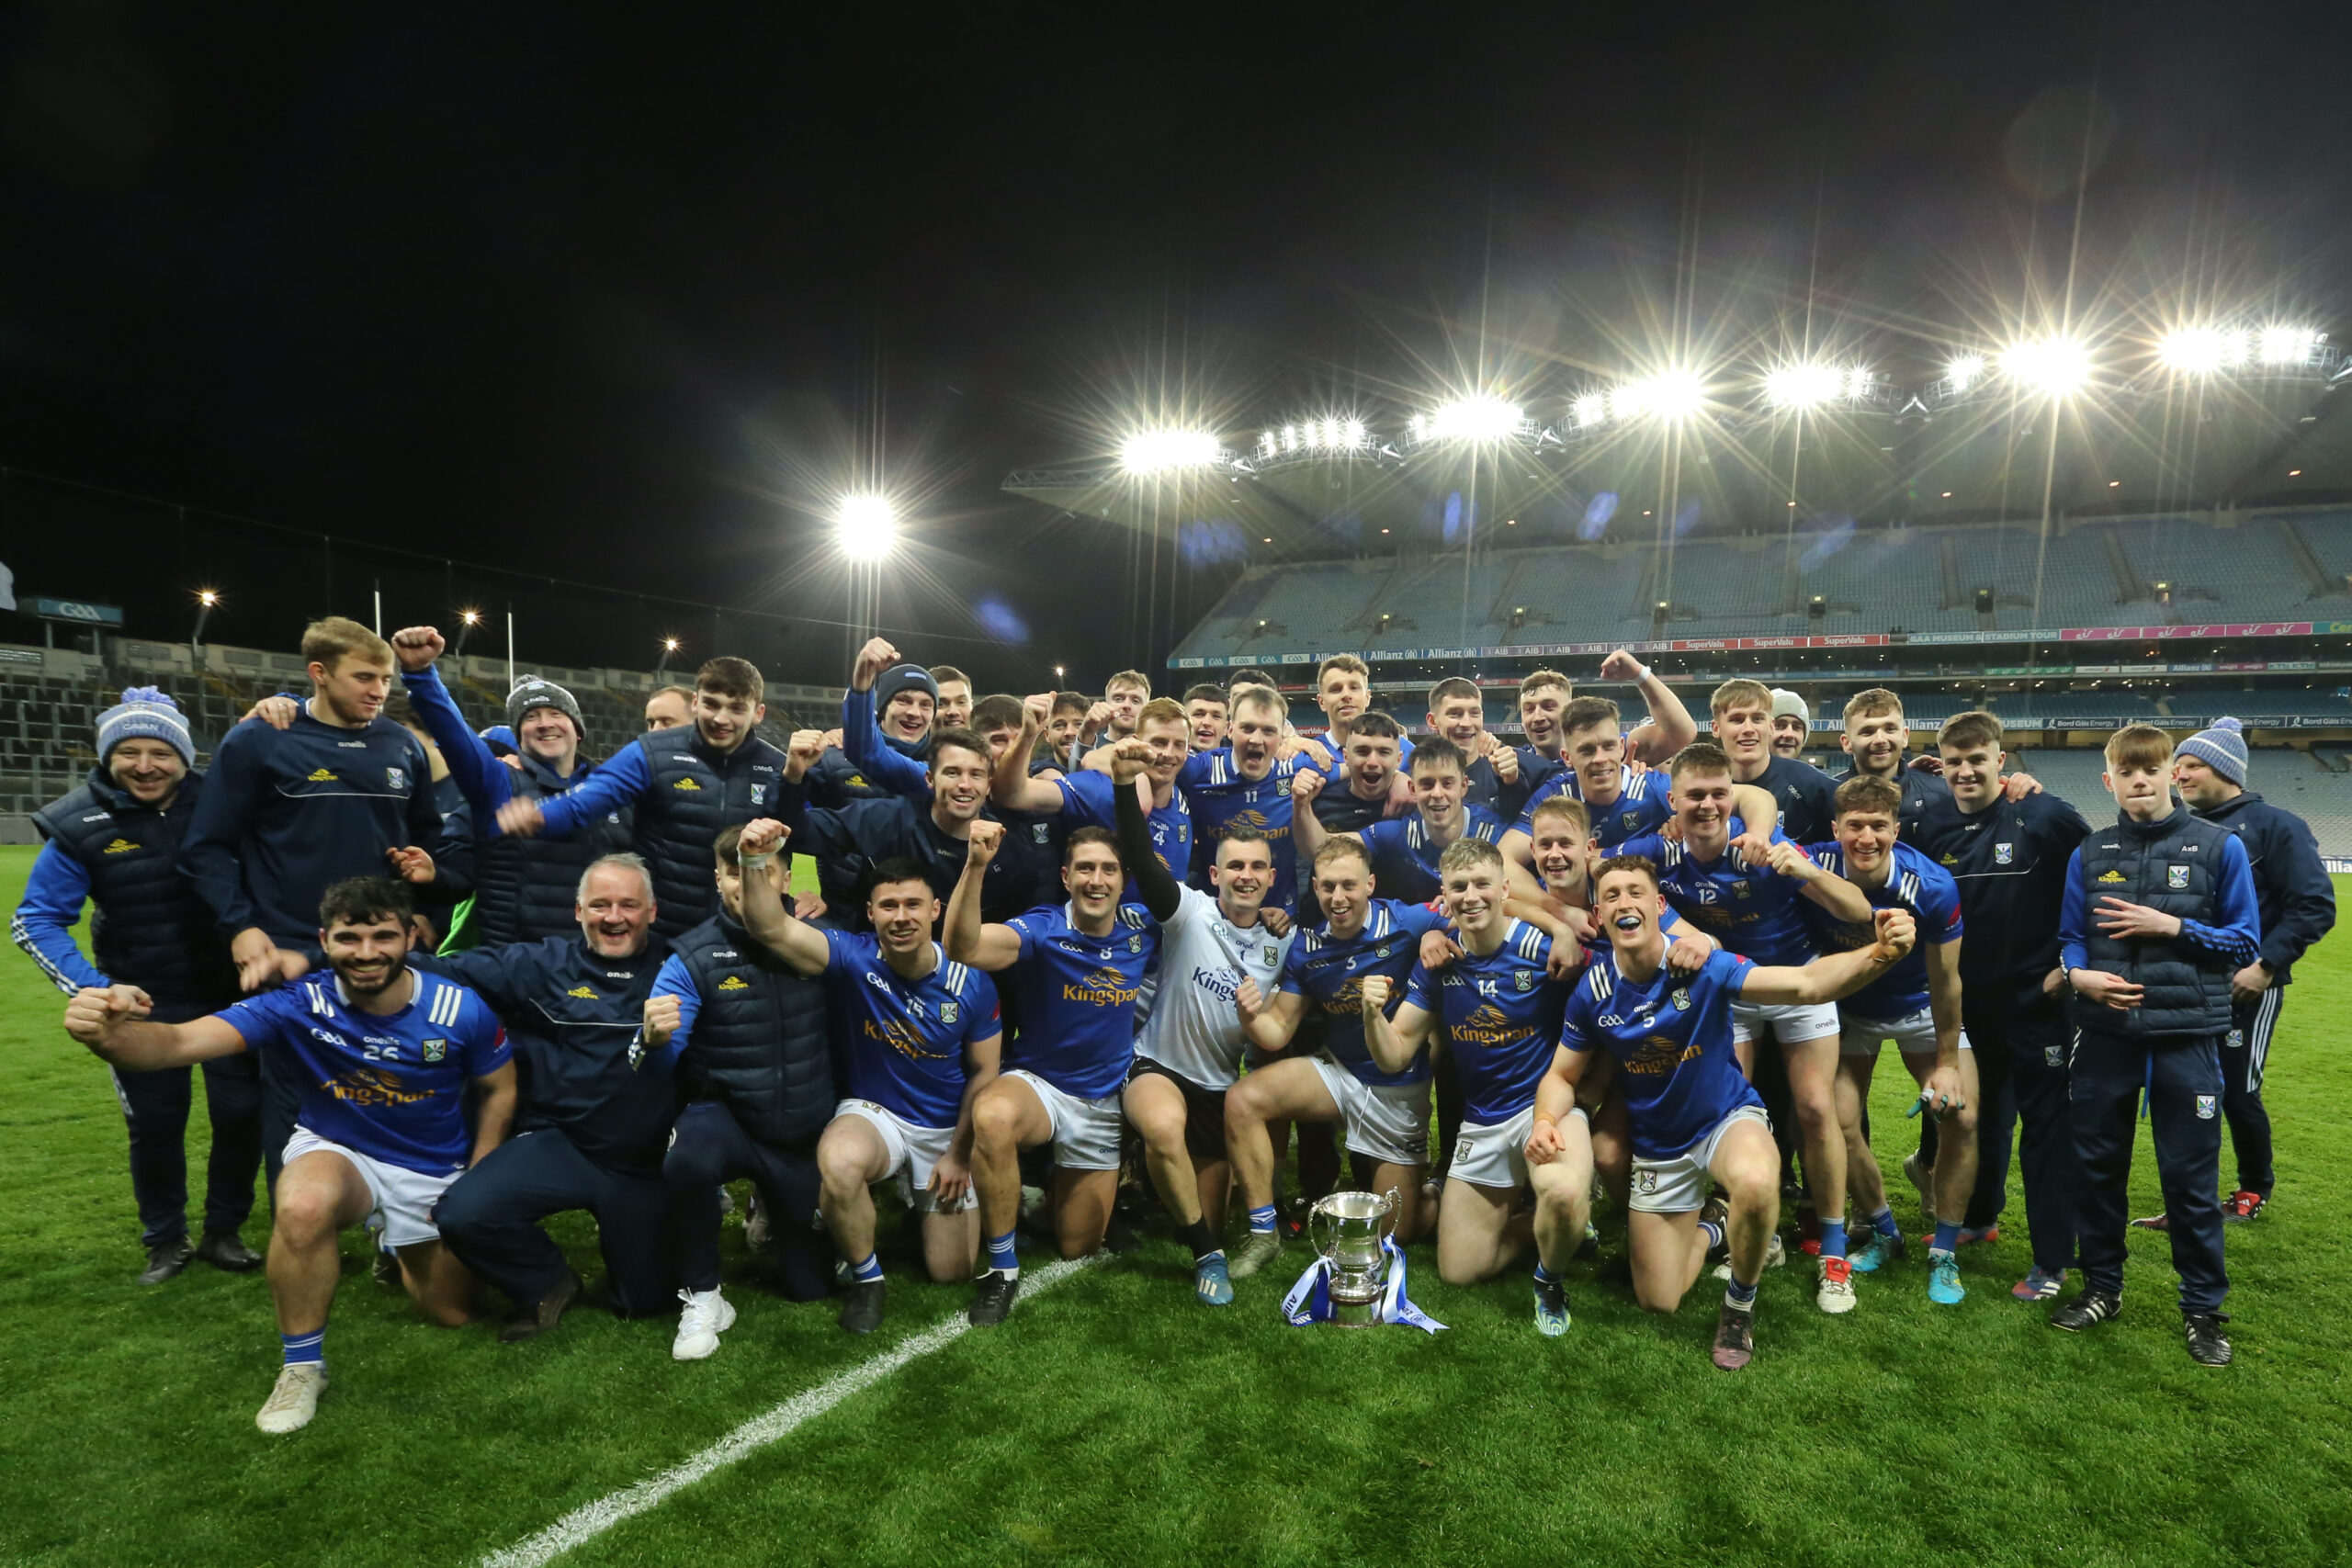 Cavan finish strongly to claim Allianz Football League Division 3 Title